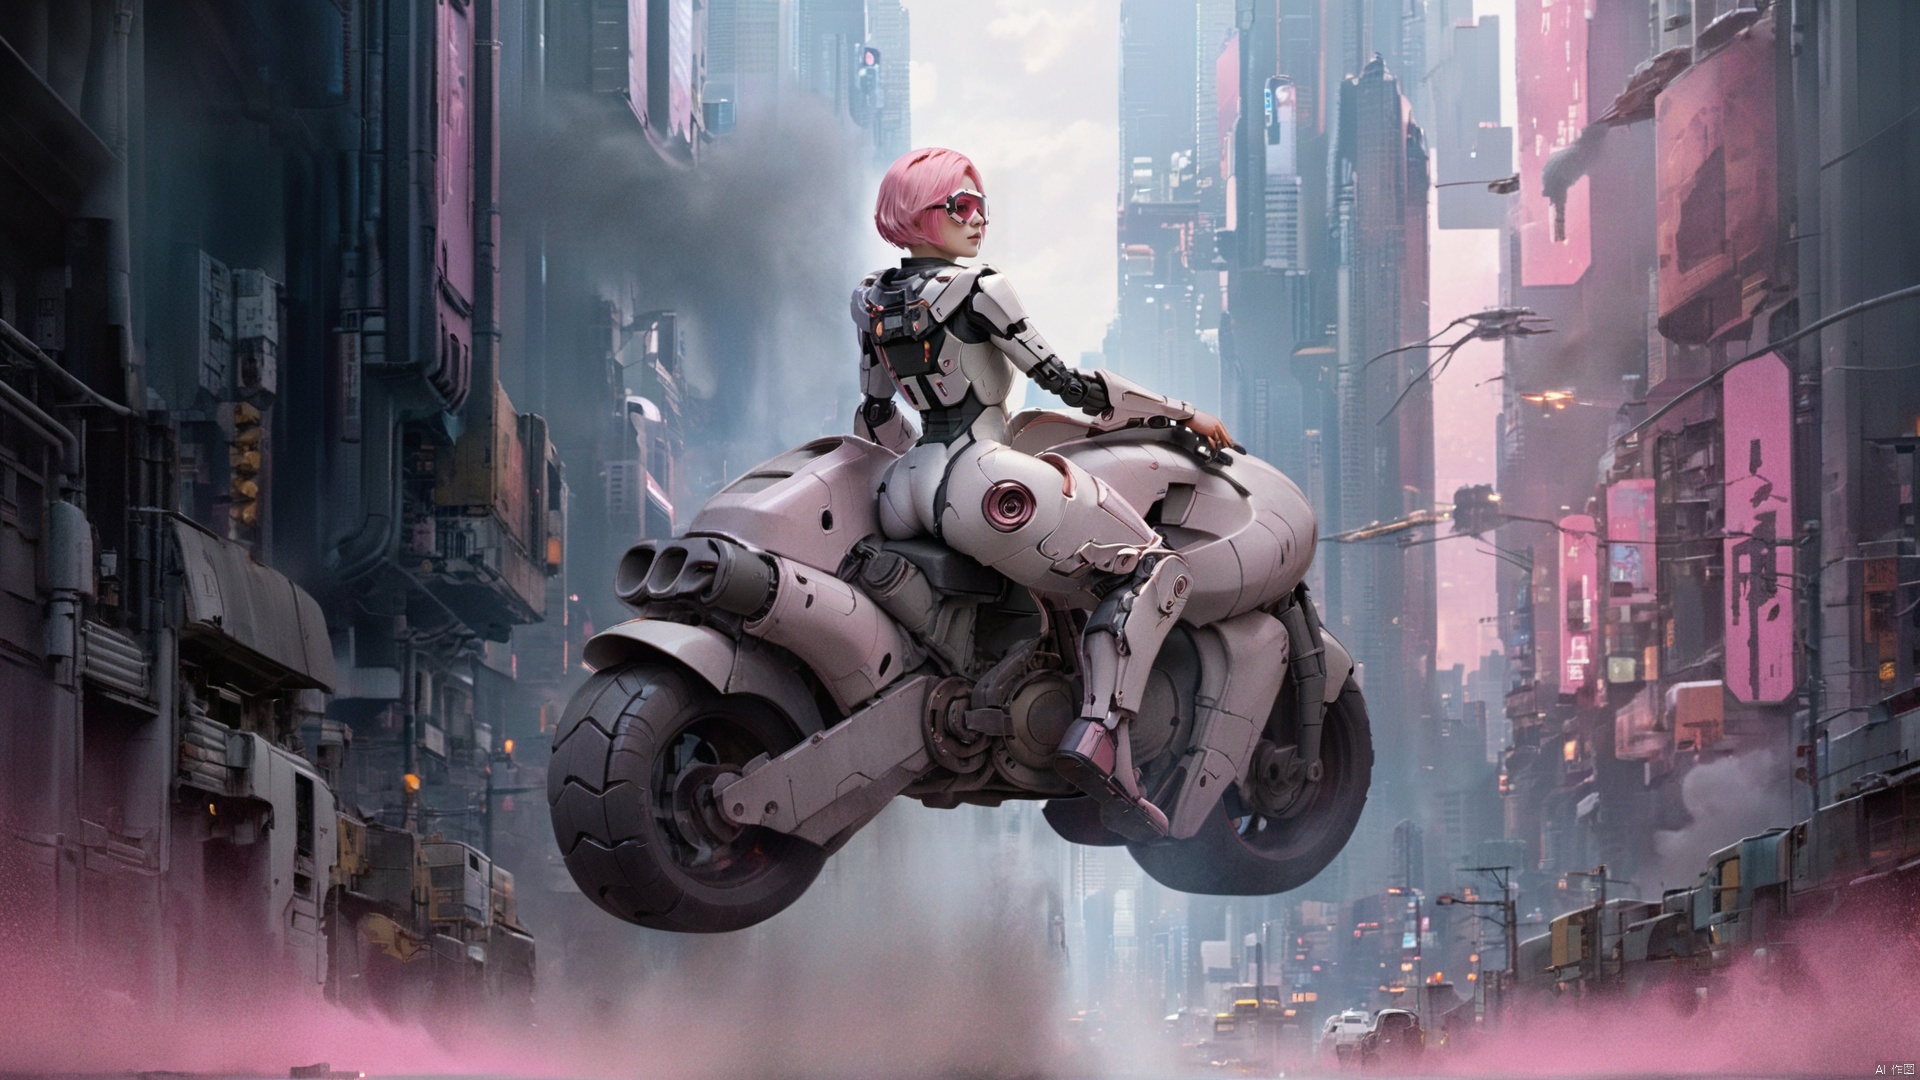  1 girl, solo, short hair, pink split short hair, pink eyes, elegant, sci-fi style, pink hair, bodysuit, cyberpunk style, (wearing a white mech and pink goggles:1.2)
,Immersed in an open wilderness, towering buildings in the cyberpunk style remain in place, causing dazzling pollution